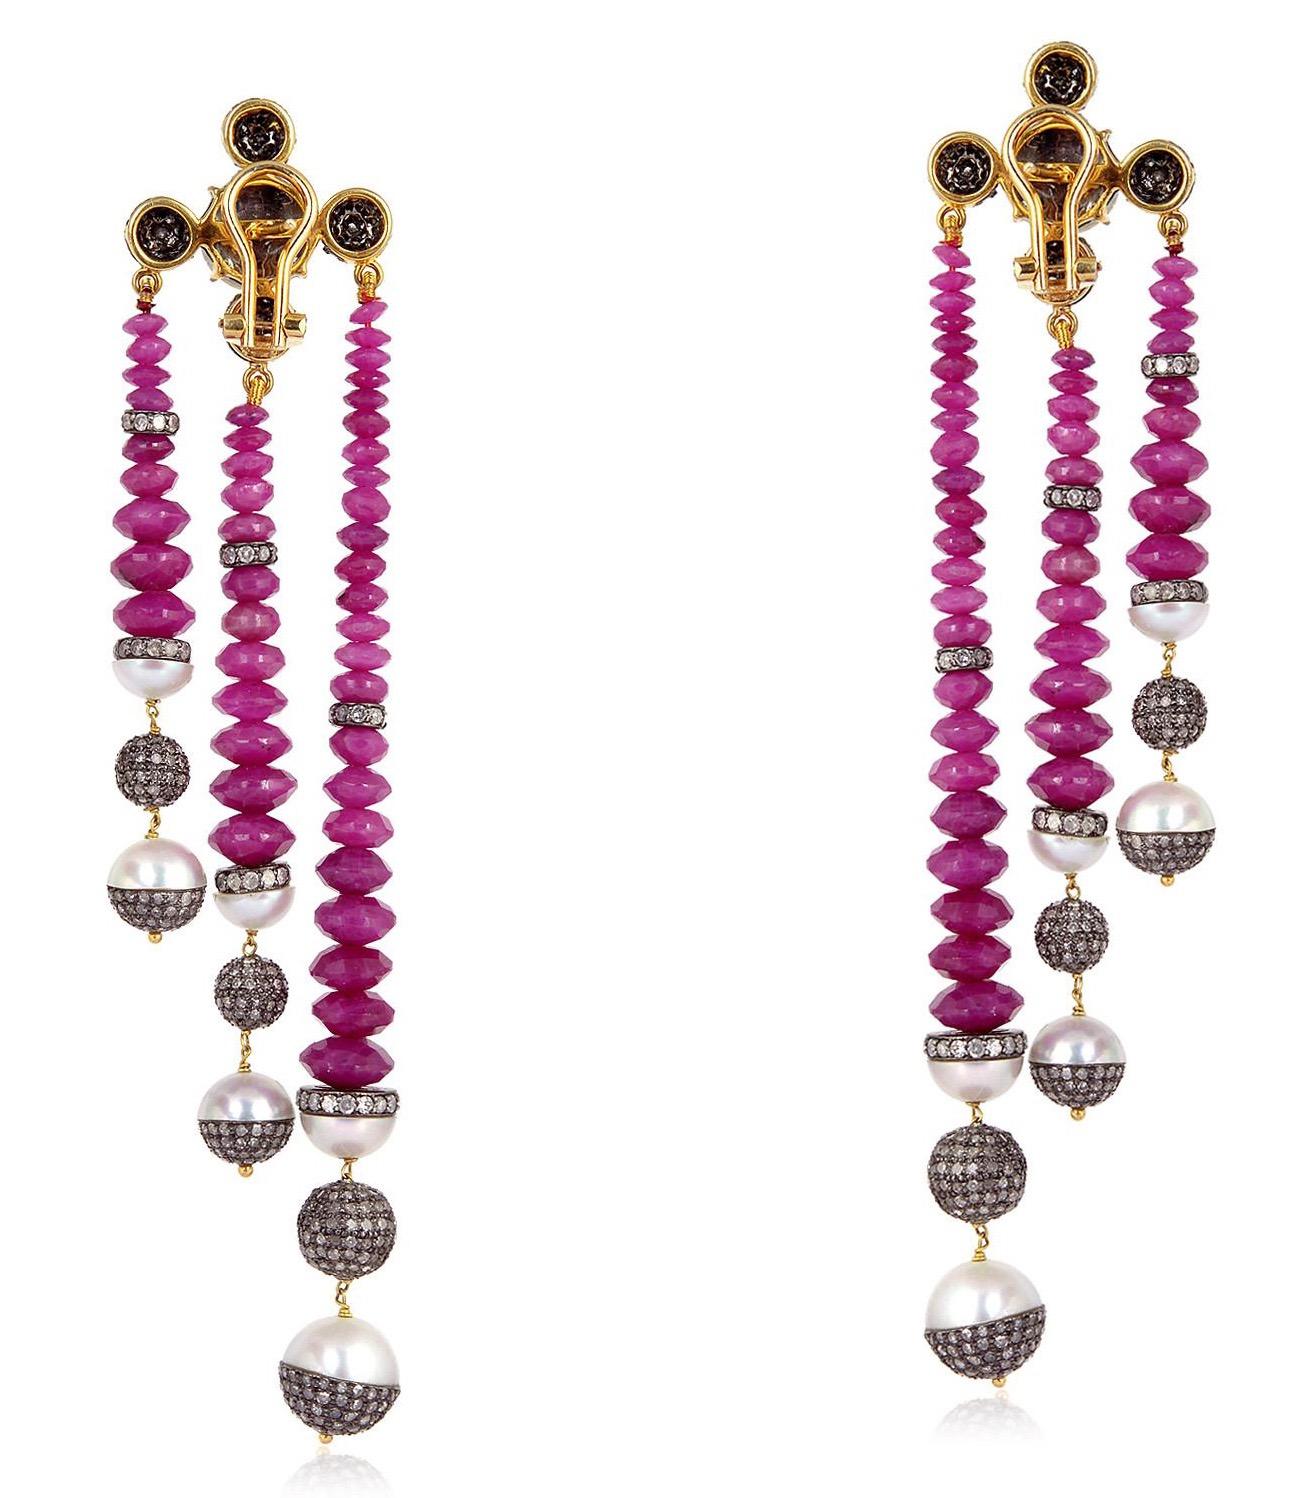 Handcrafted from 18-karat gold & Sterling Silver, these beautiful earrings are set in 78.0 carats ruby, 23.2 carats pearl and 7.99 carats of glimmering diamonds.

FOLLOW  MEGHNA JEWELS storefront to view the latest collection & exclusive pieces. 